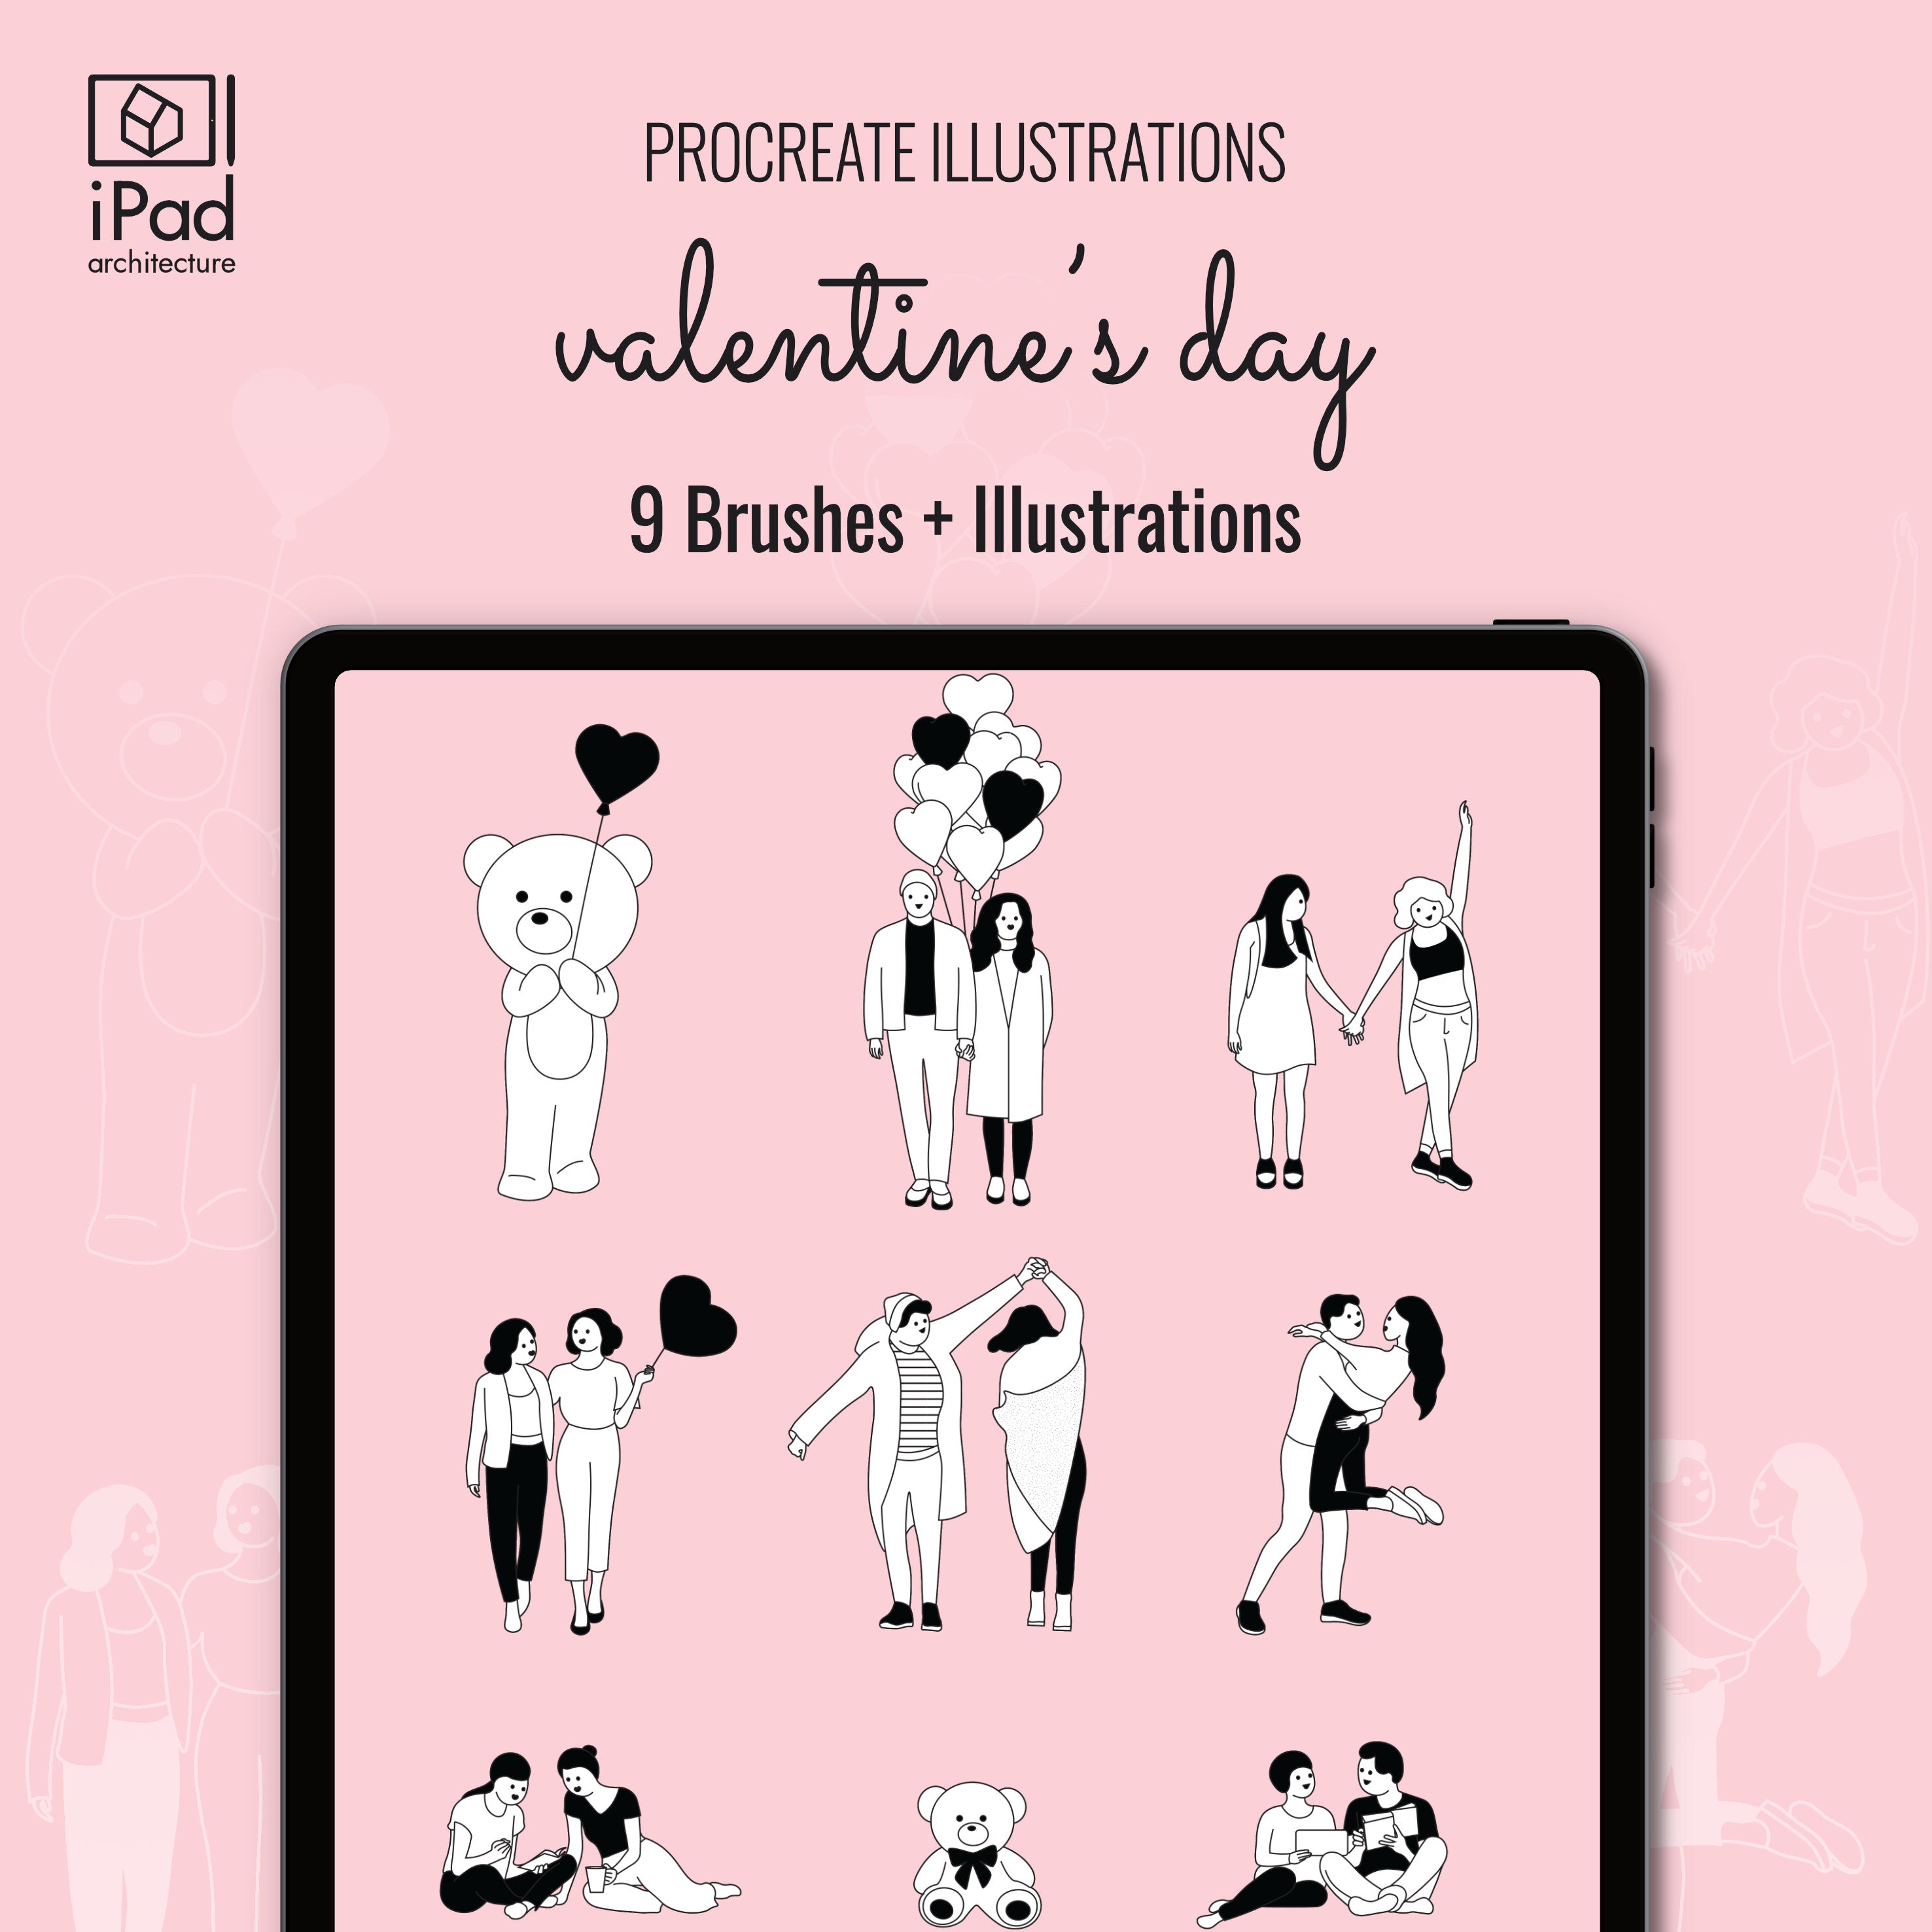 Free - Procreate Valentine's Day Brushset & Illustrations PNG - Toffu Co